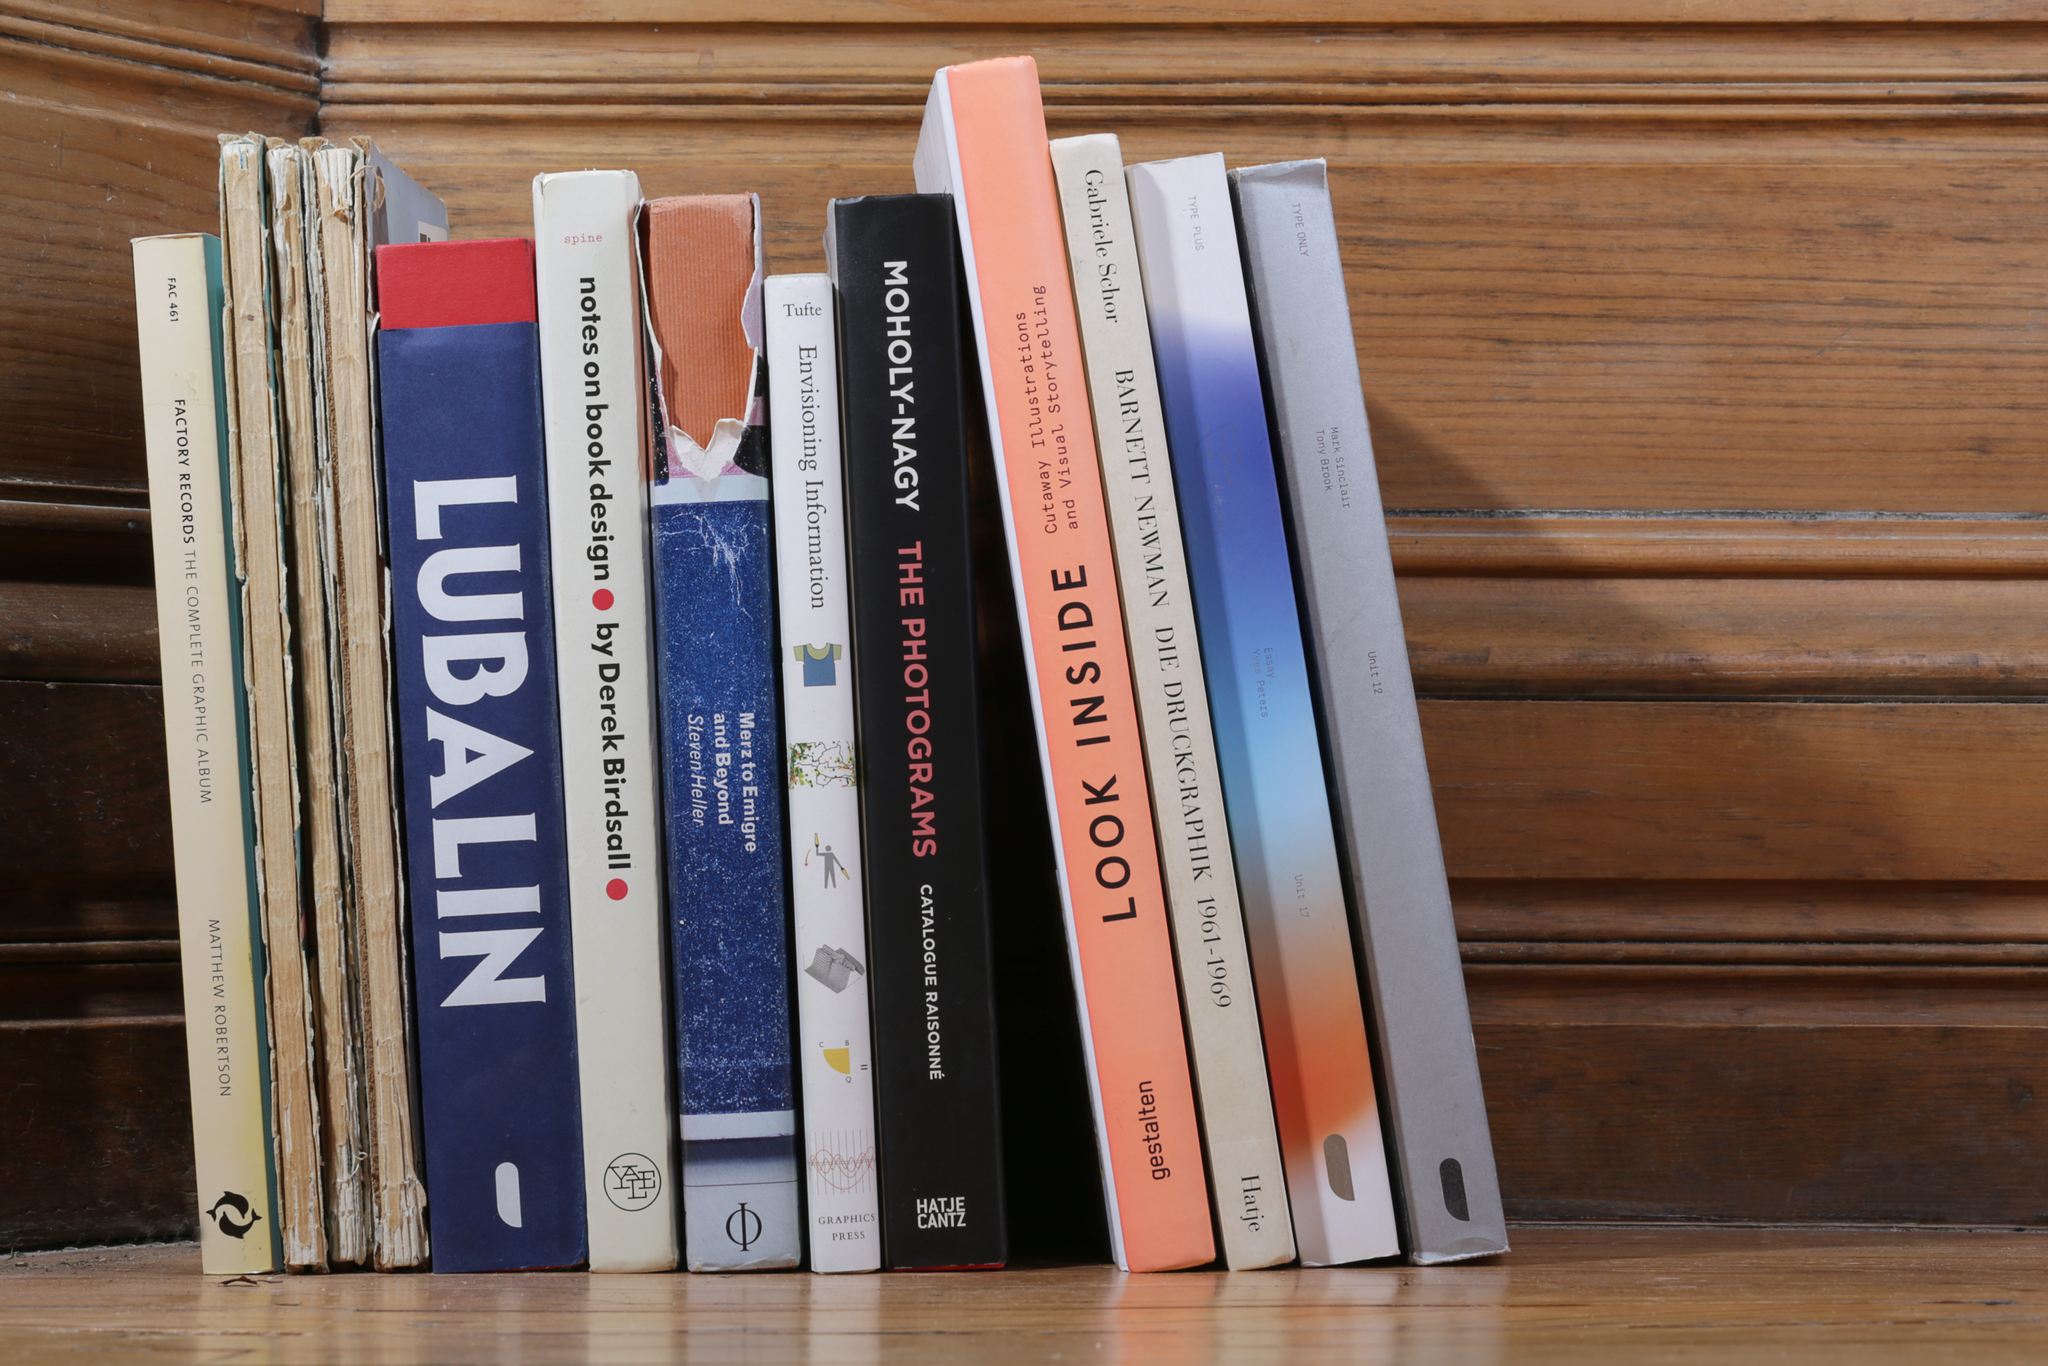 Top Ten Design Books to Use for Creative Inspiration